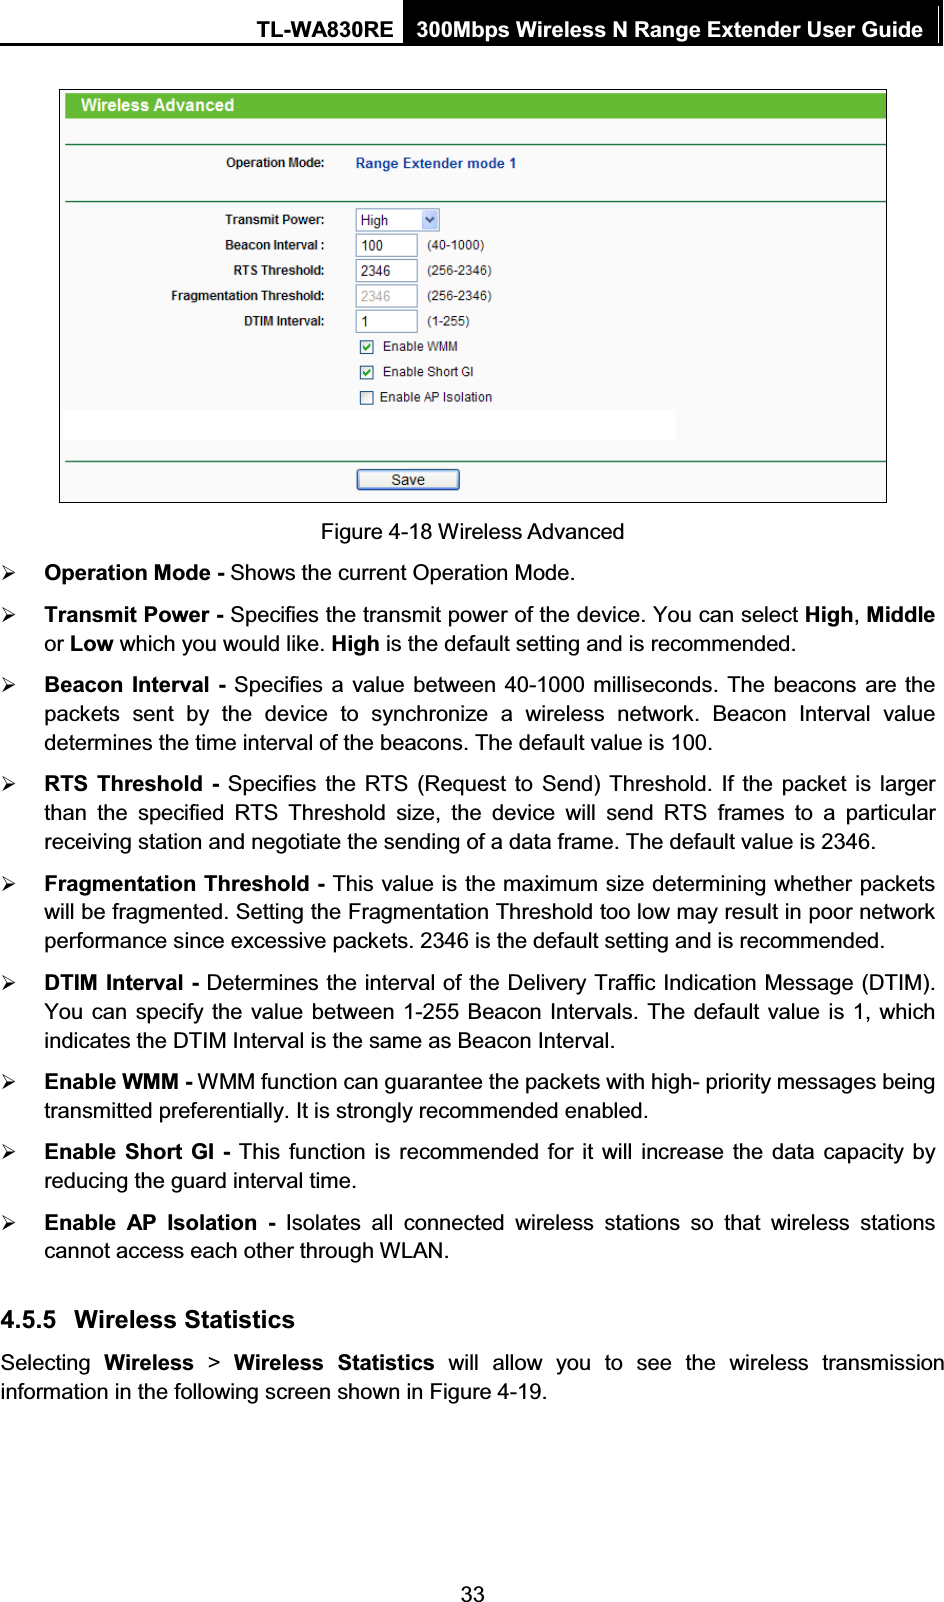 TL-WA830RE  300Mbps Wireless N Range Extender User Guide  33  Figure 4-18 Wireless Advanced ¾ Operation Mode - Shows the current Operation Mode. ¾ Transmit Power - Specifies the transmit power of the device. You can select High, Middle or Low which you would like. High is the default setting and is recommended.   ¾ Beacon Interval - Specifies a value between 40-1000 milliseconds. The beacons are the packets sent by the device to synchronize a wireless network. Beacon Interval value determines the time interval of the beacons. The default value is 100.   ¾ RTS Threshold - Specifies the RTS (Request to Send) Threshold. If the packet is larger than the specified RTS Threshold size, the device will send RTS frames to a particular receiving station and negotiate the sending of a data frame. The default value is 2346.   ¾ Fragmentation Threshold - This value is the maximum size determining whether packets will be fragmented. Setting the Fragmentation Threshold too low may result in poor network performance since excessive packets. 2346 is the default setting and is recommended.   ¾ DTIM Interval - Determines the interval of the Delivery Traffic Indication Message (DTIM). You can specify the value between 1-255 Beacon Intervals. The default value is 1, which indicates the DTIM Interval is the same as Beacon Interval.   ¾ Enable WMM - WMM function can guarantee the packets with high- priority messages being transmitted preferentially. It is strongly recommended enabled.   ¾ Enable Short GI - This function is recommended for it will increase the data capacity by reducing the guard interval time.   ¾ Enable AP Isolation - Isolates all connected wireless stations so that wireless stations cannot access each other through WLAN.   4.5.5 Wireless Statistics Selecting  Wireless &gt; Wireless Statistics will allow you to see the wireless transmission information in the following screen shown in Figure 4-19. 